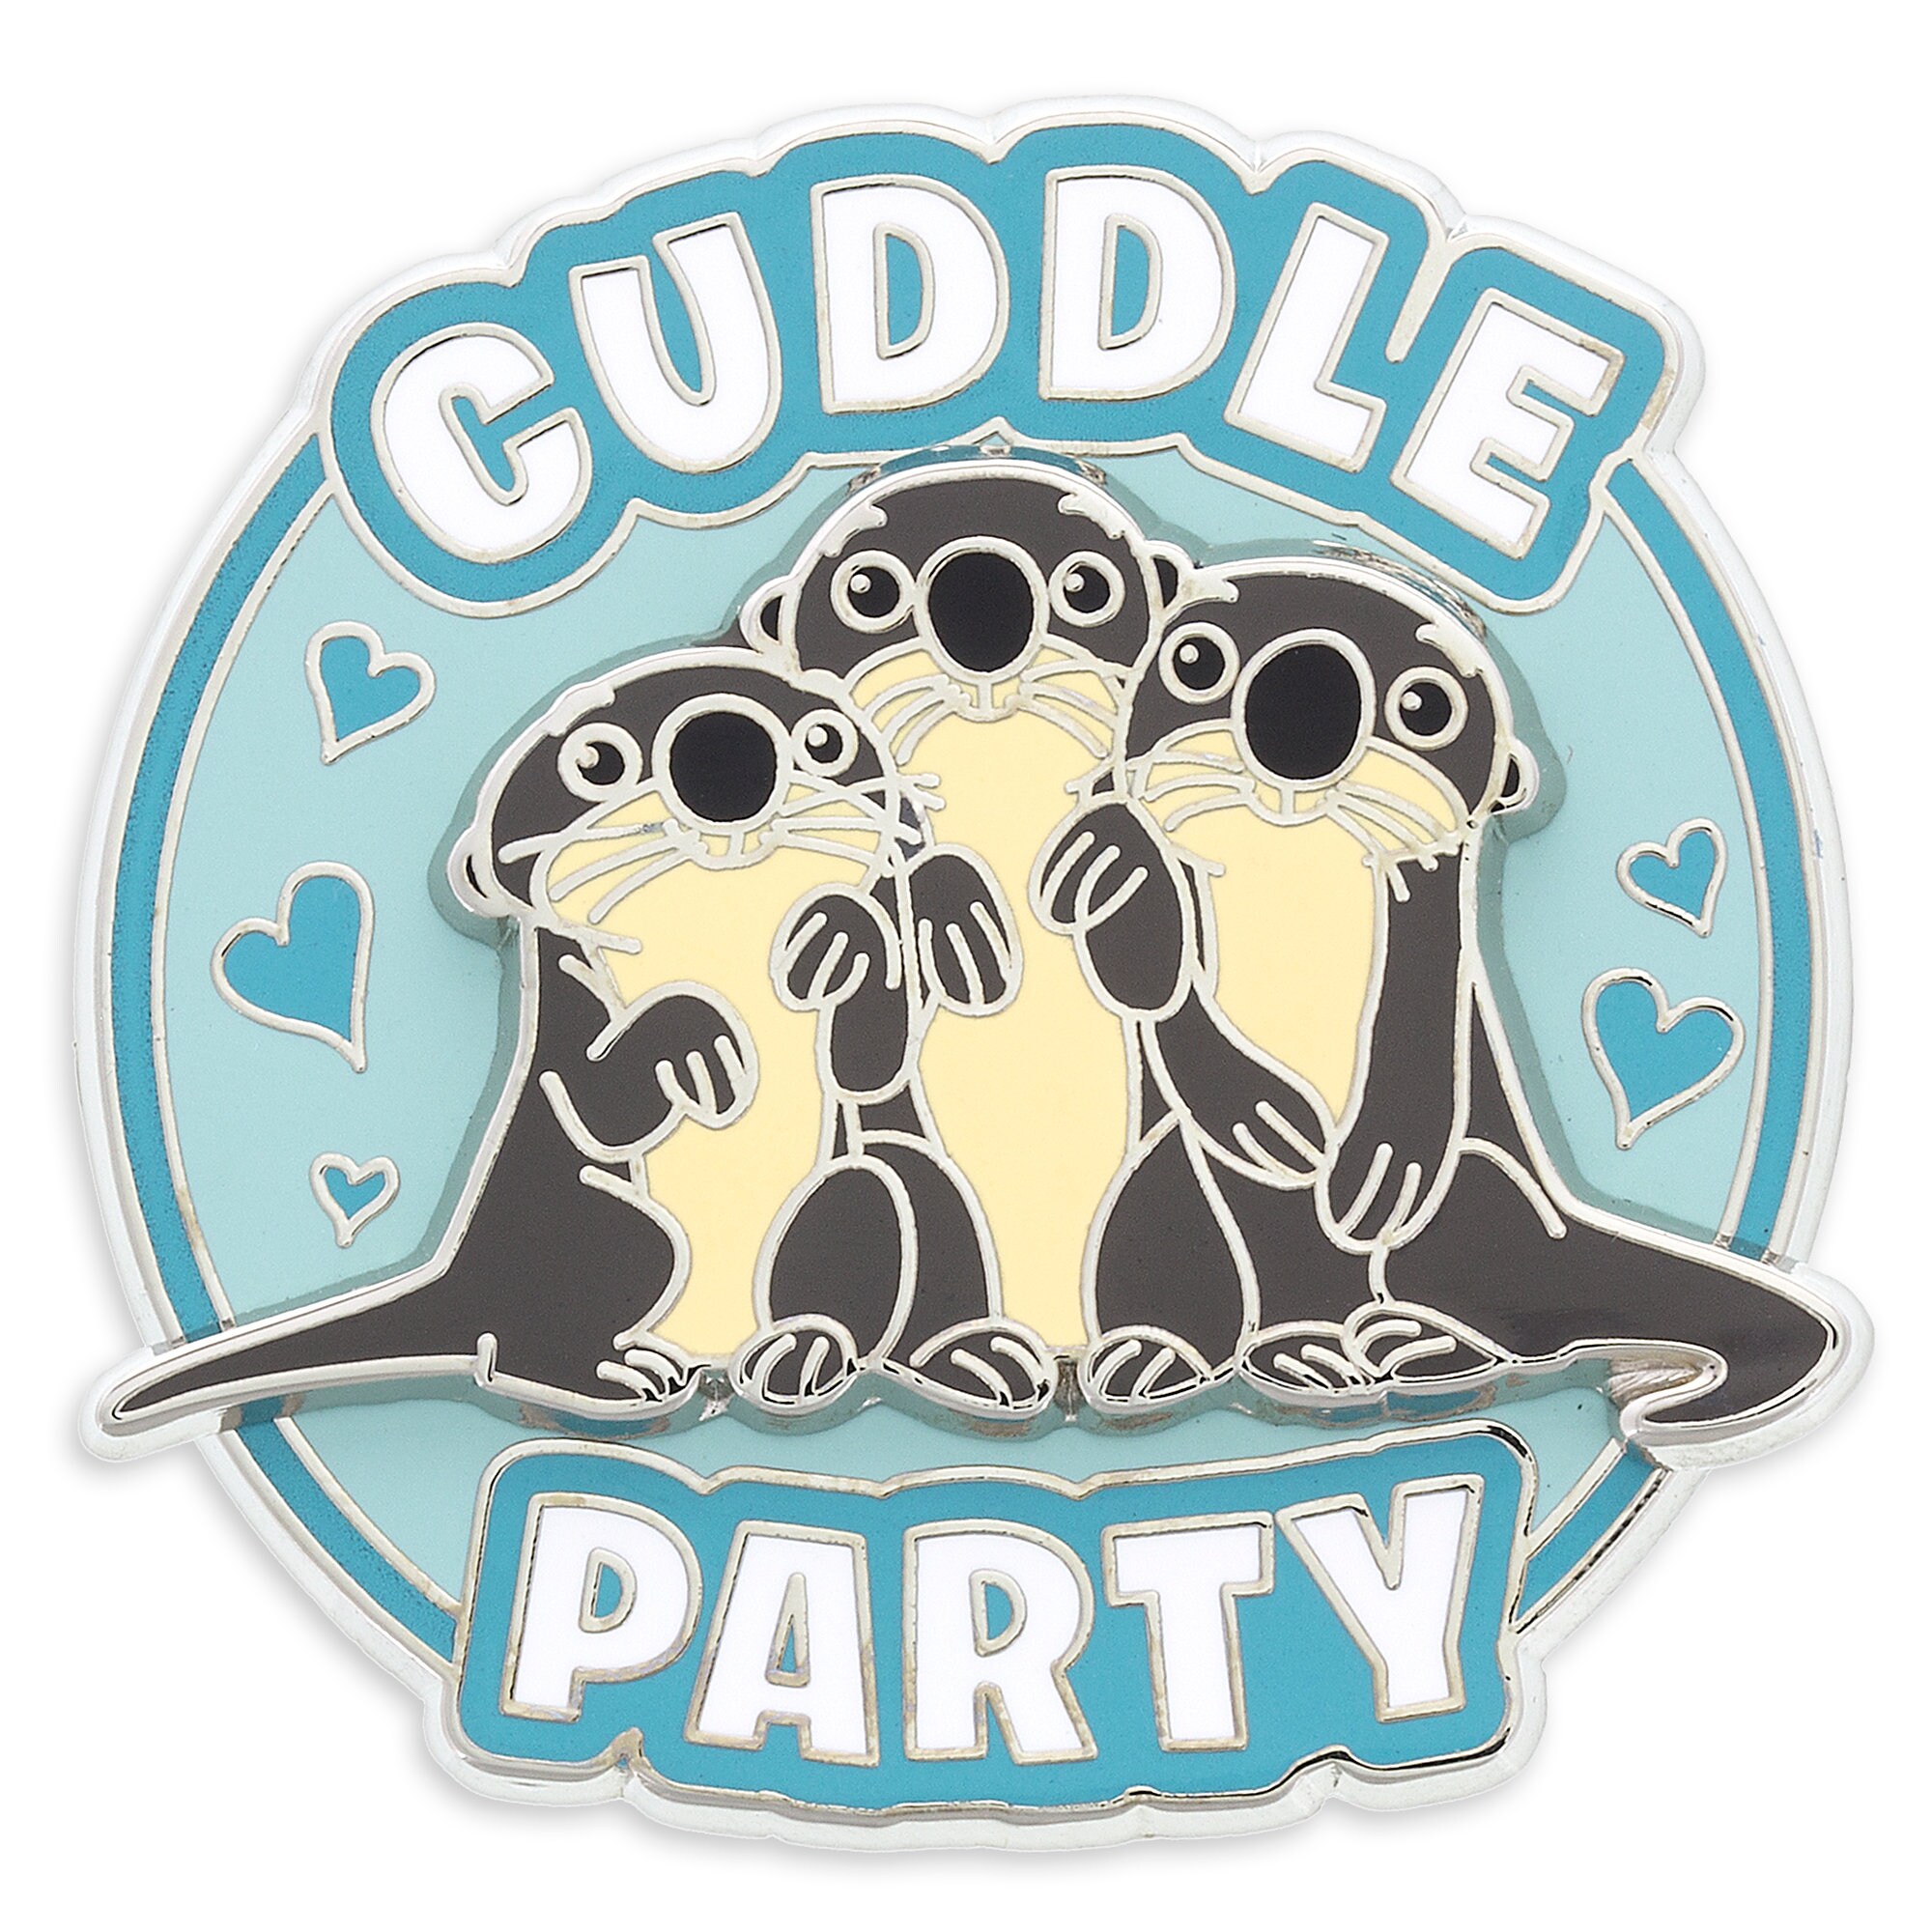 Otter Cuddle Party Pin - Finding Dory